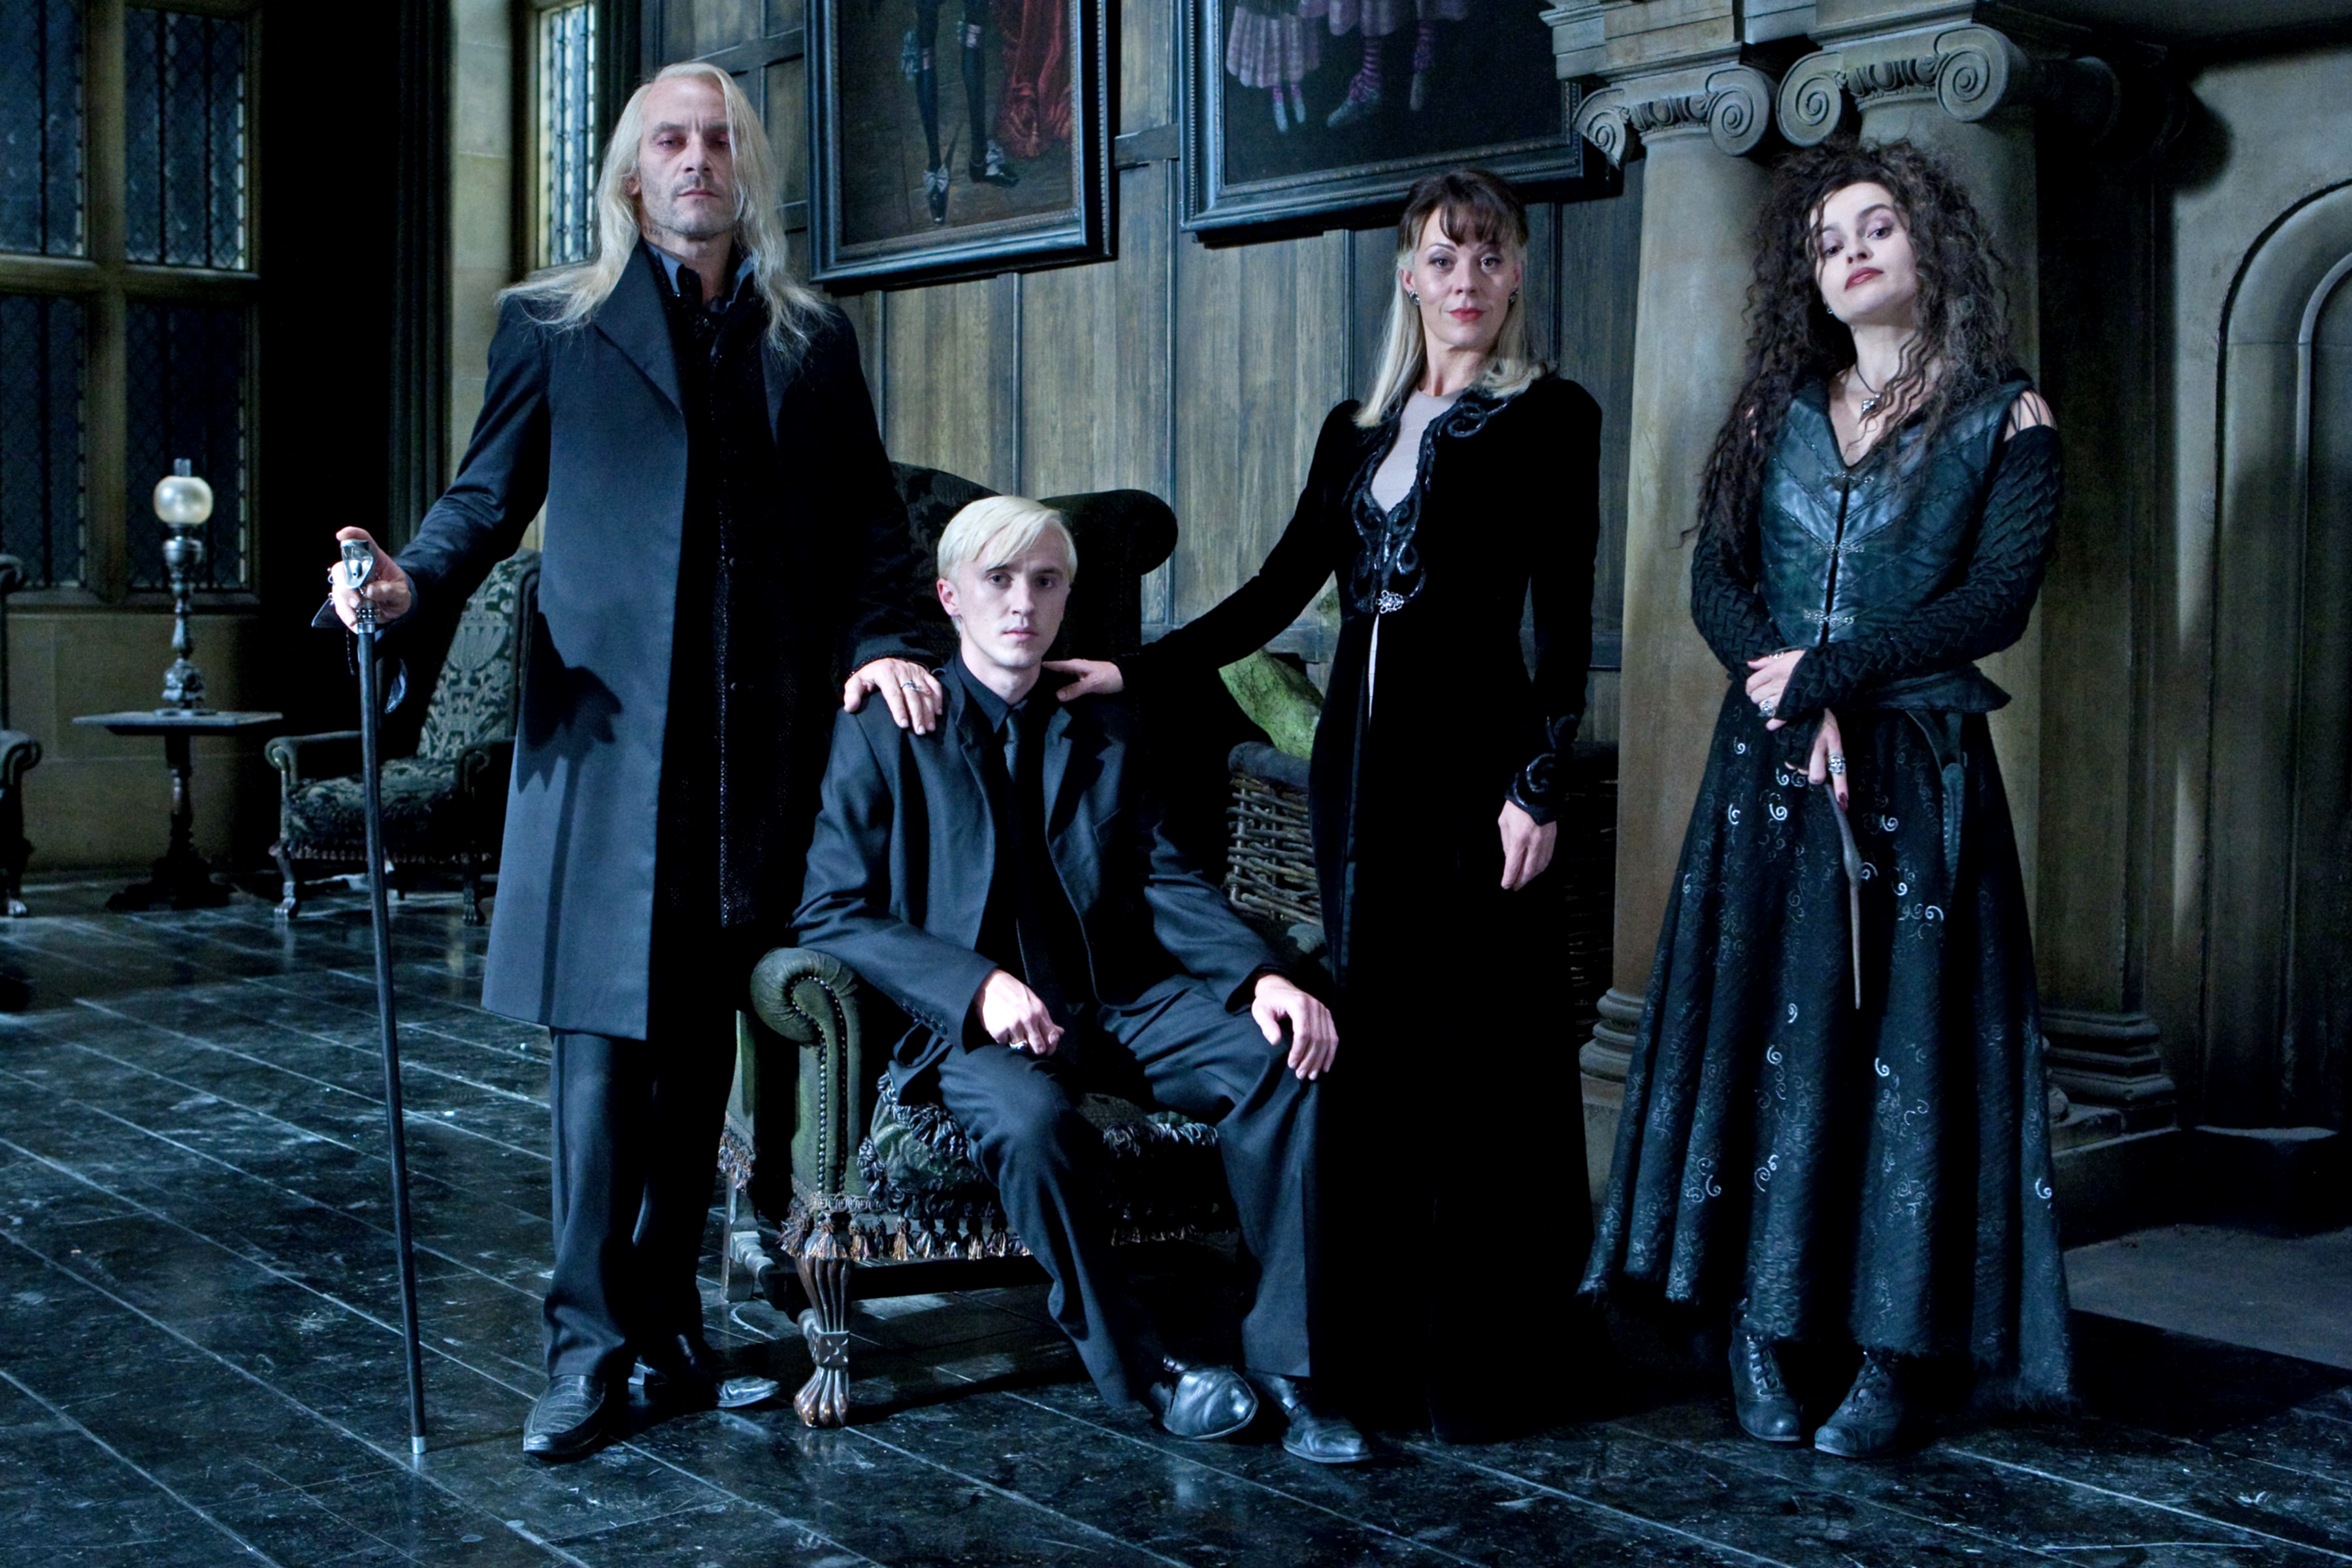 The Harry Potter Movies: The Dark and Mysterious World of the Malfoy Family